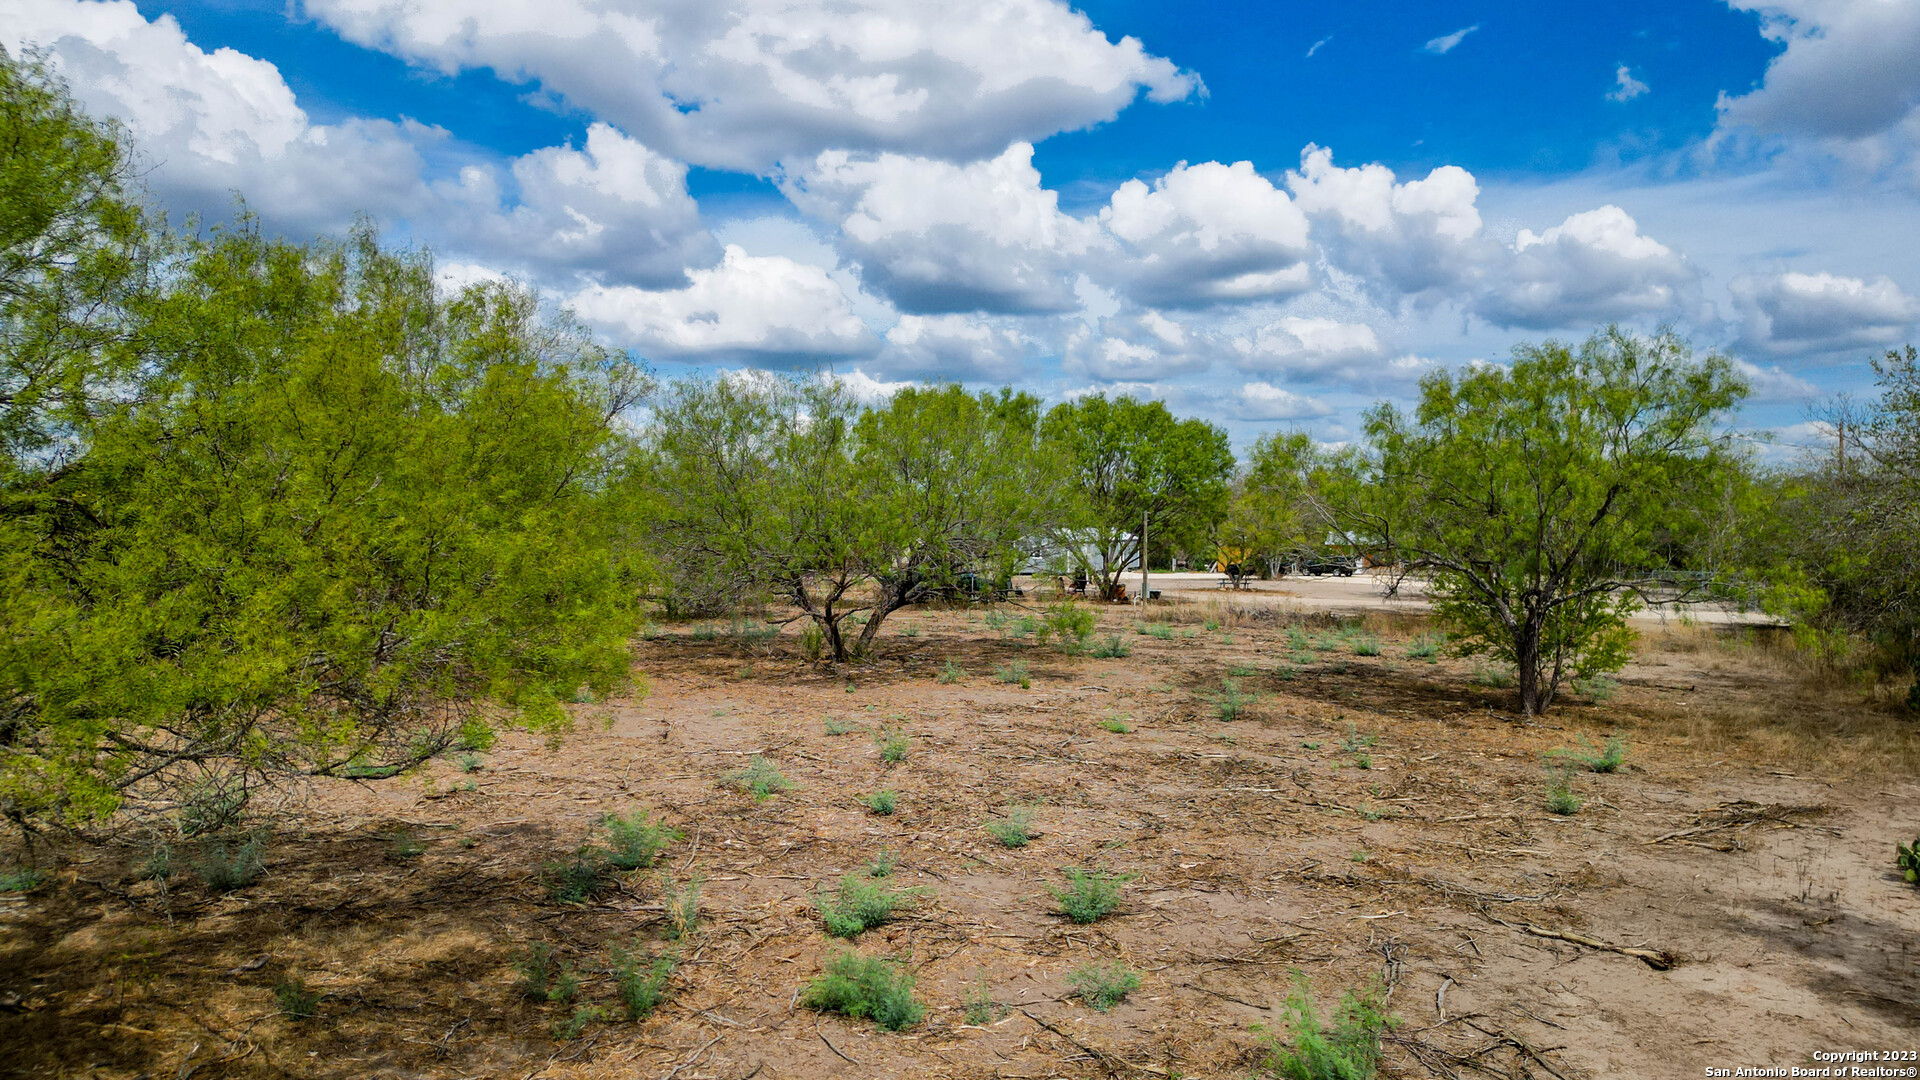 Photo of Tract 3 605 County Rd 6716 in Natalia, TX